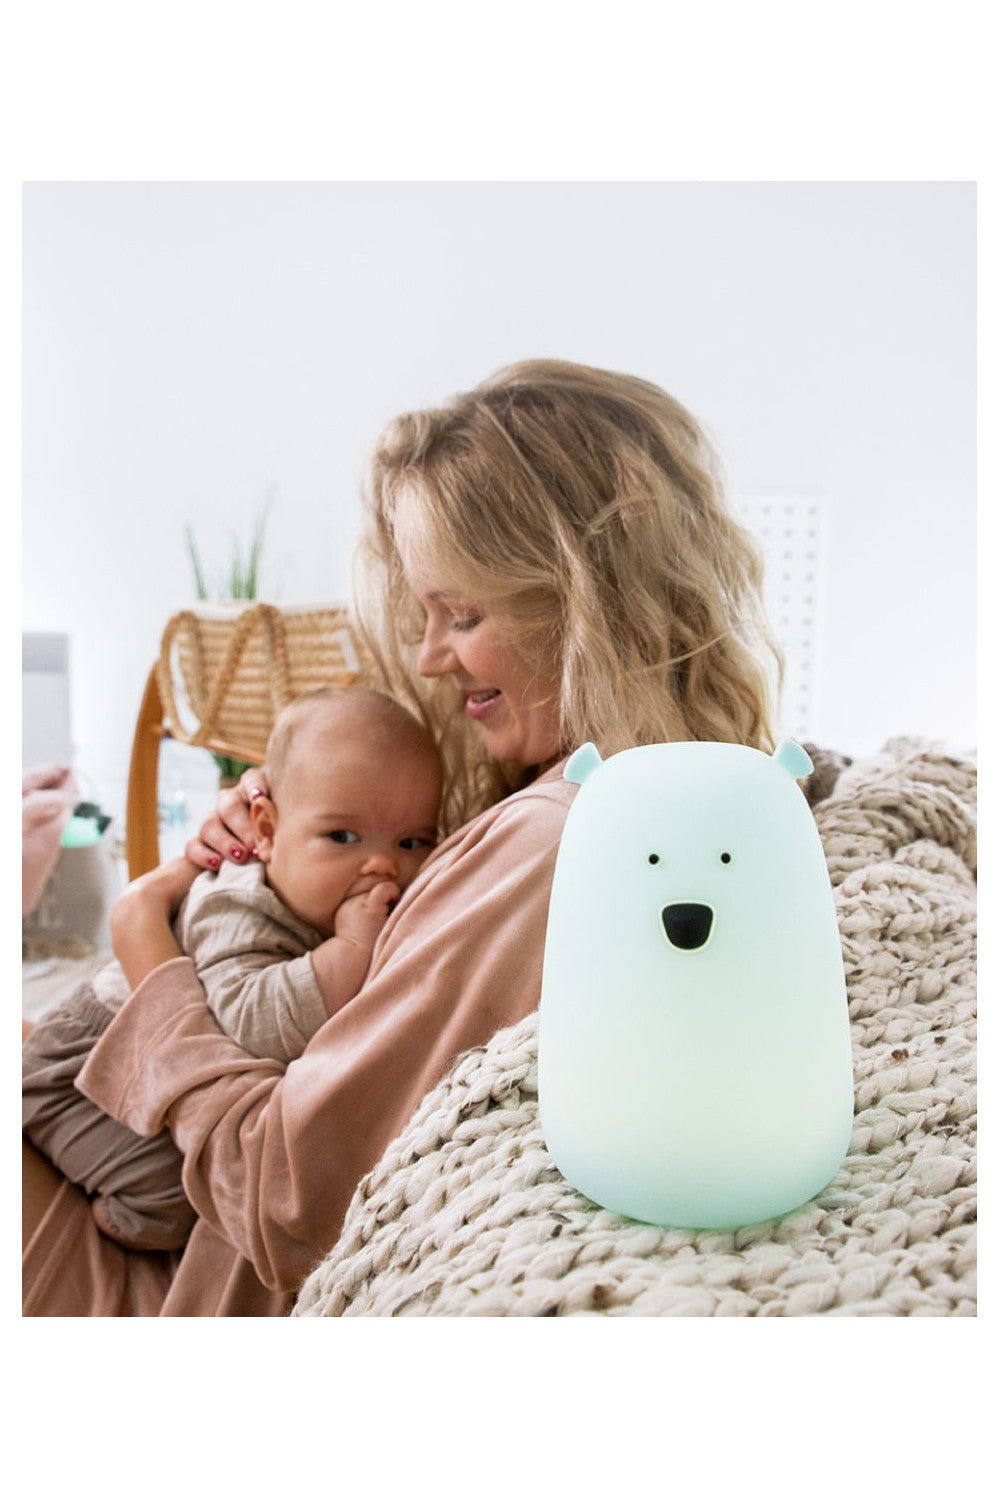 A woman holding a baby, a white object with a face, and a light-up toy on a blanket, embodying the Big Bear Silicone Lamp by Rabbit & Friends, a comforting and playful companion for children's bedtime routines.